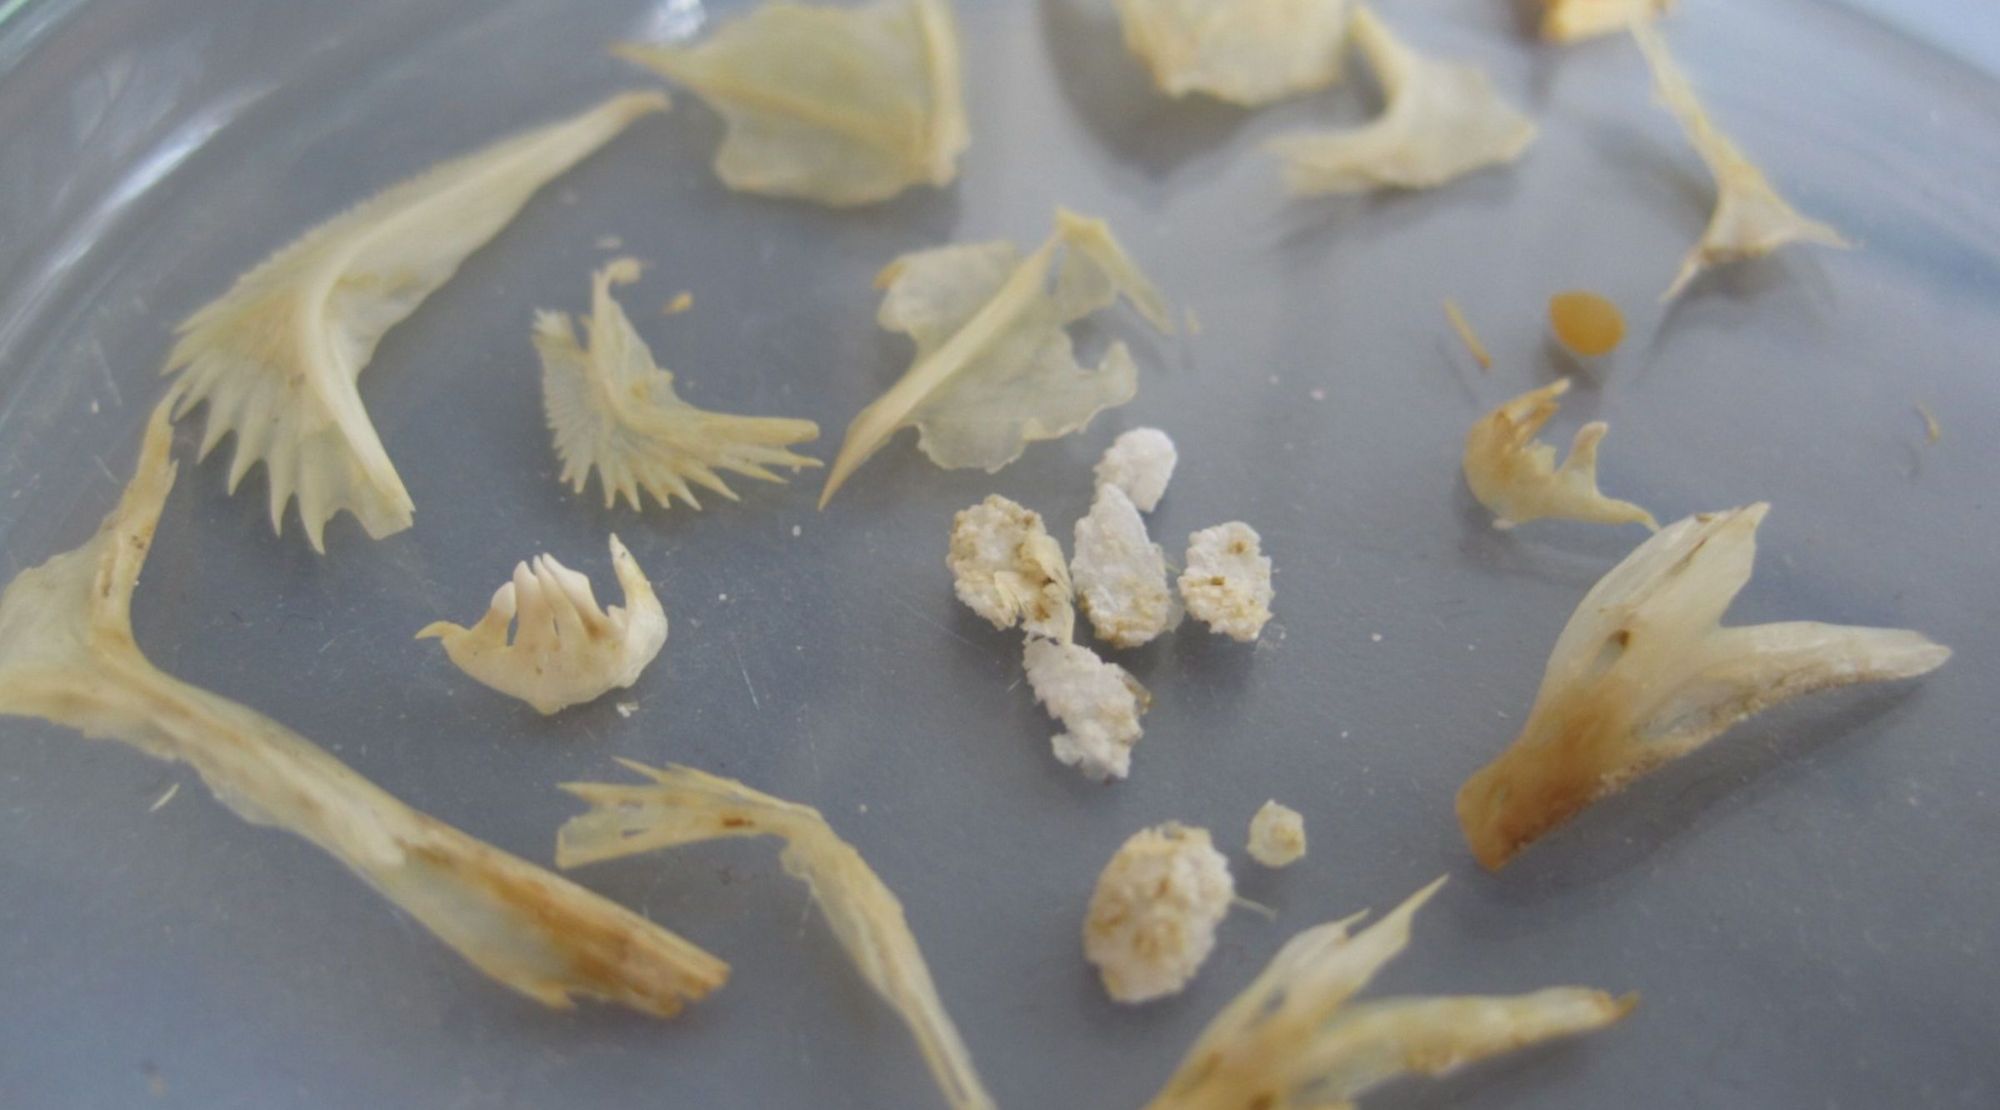 sorted fish bones from a cormorant spit ball in a petri dish